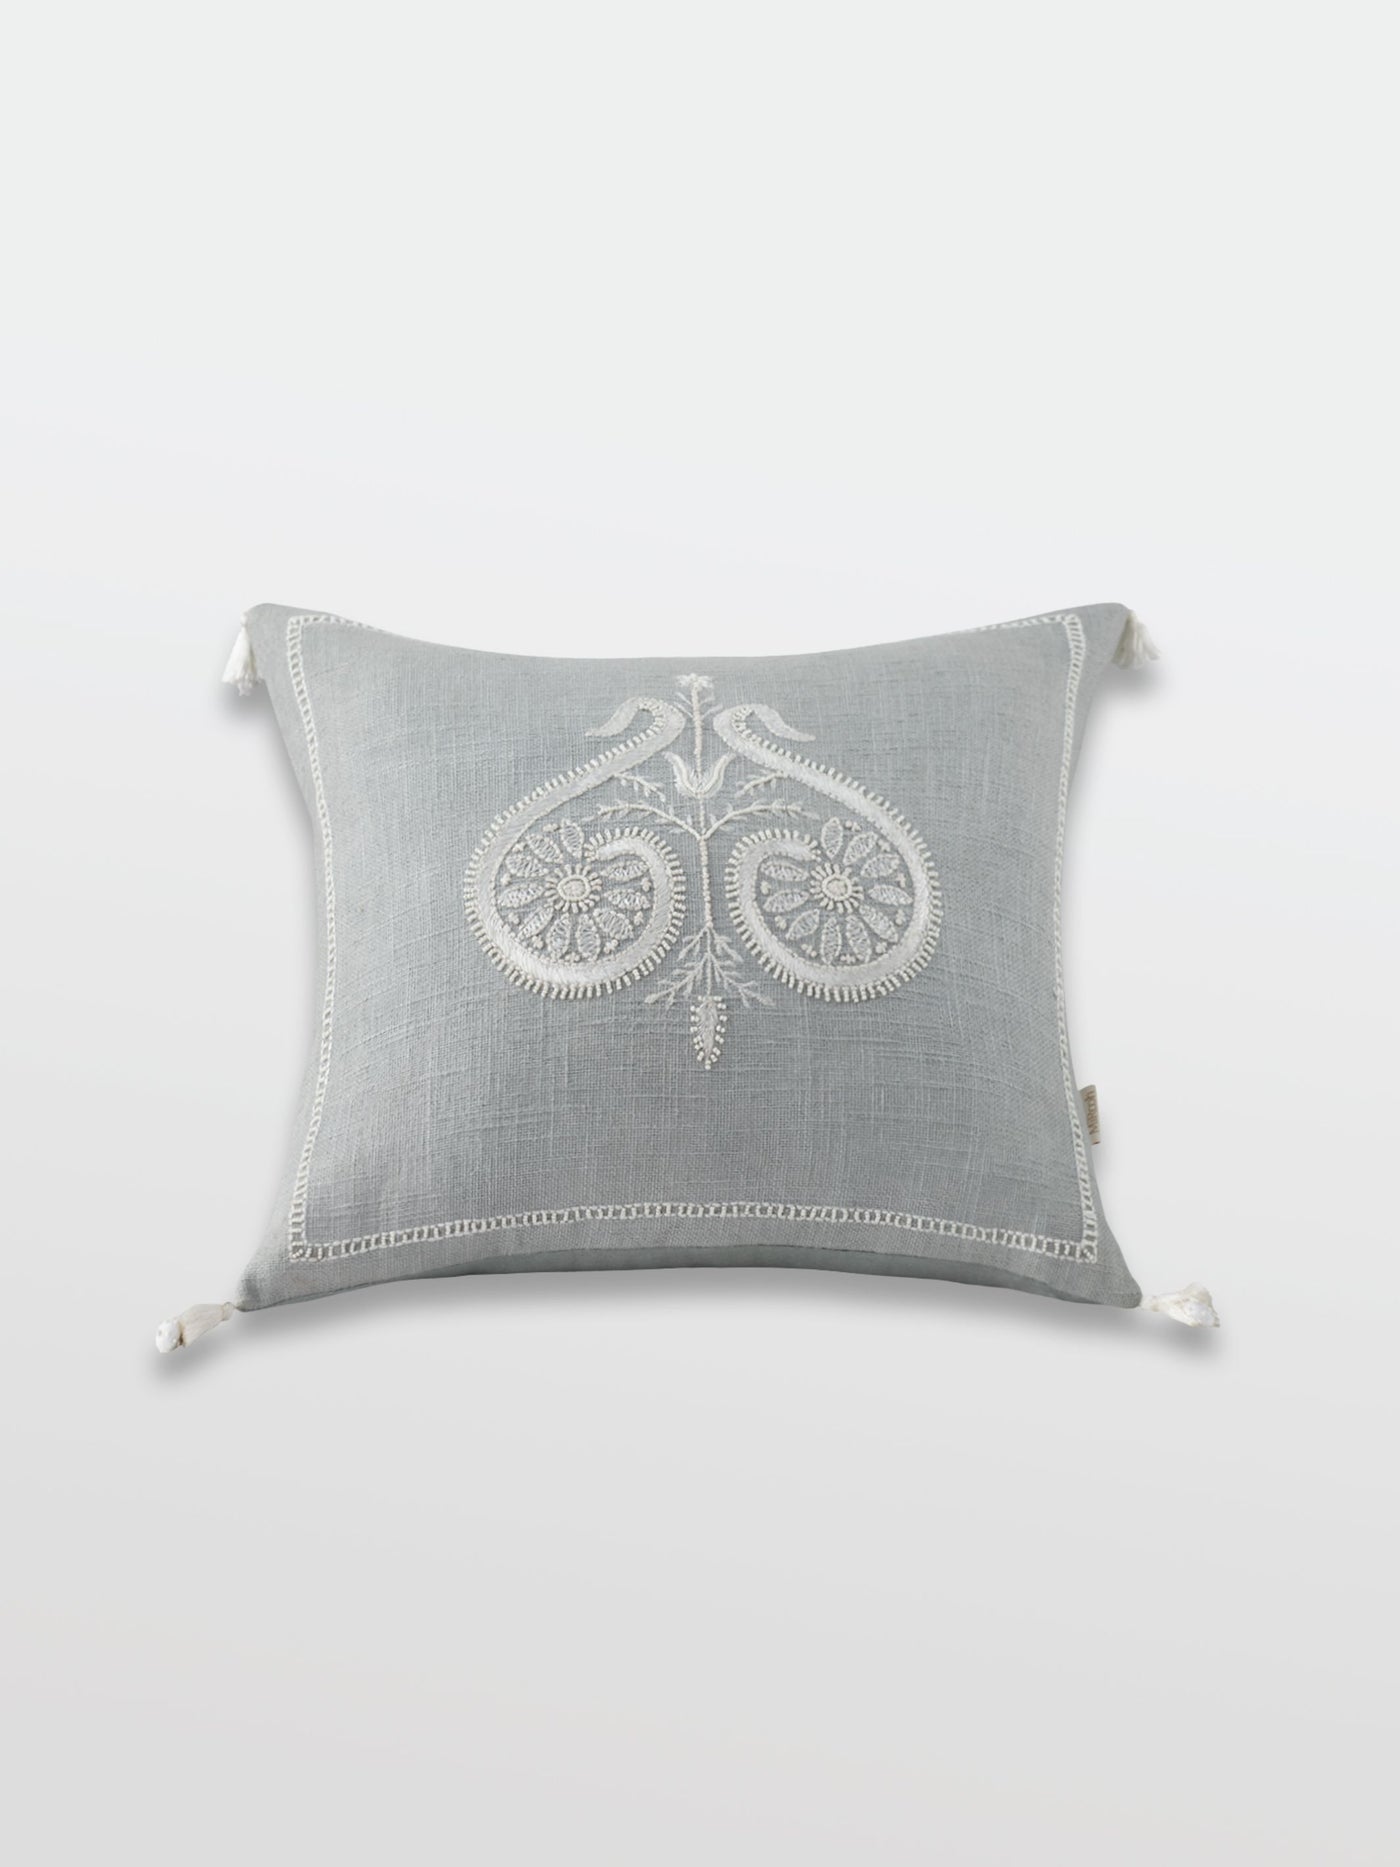 Cushion Cover - Numaish Steel Blue Embroidered